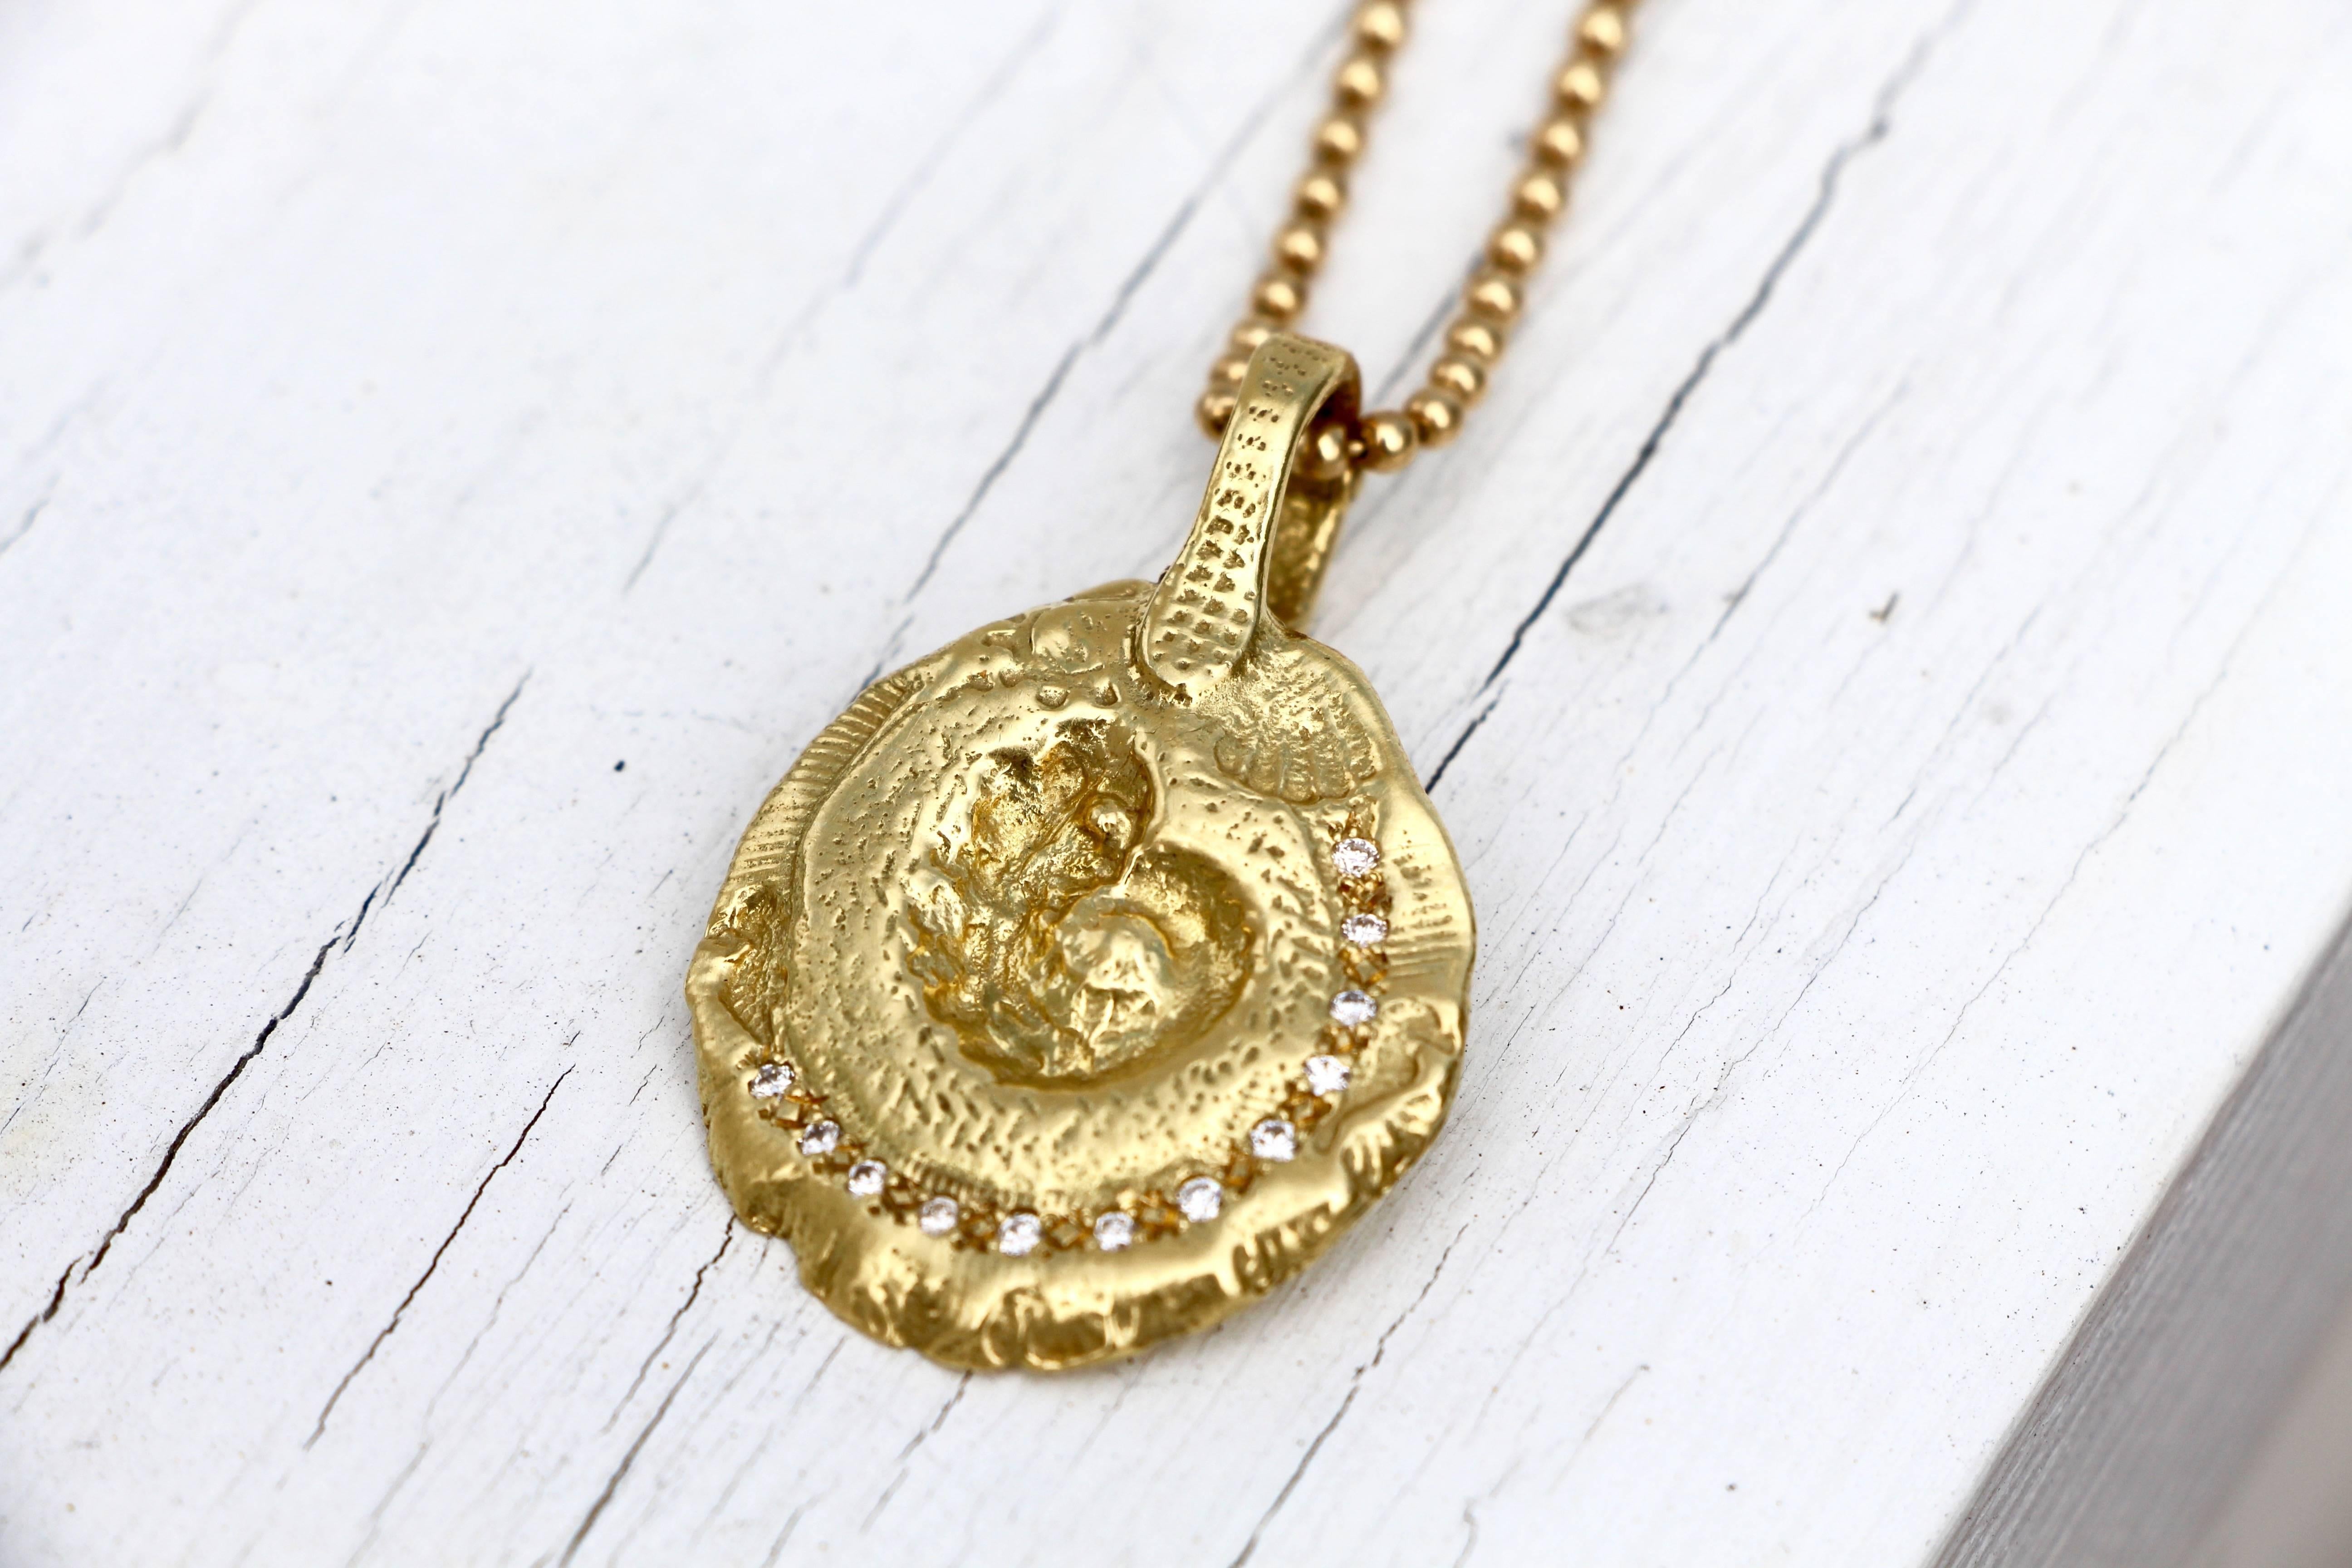 The nautilus shell is thought to be the symbol of life and harmony. Our Nautilus Fossil is not set in stone, but in glorious 18 Karat Gold and sprinkled with Diamonds and features a versatile bale that can be attached to Pearls or worn on a lovely